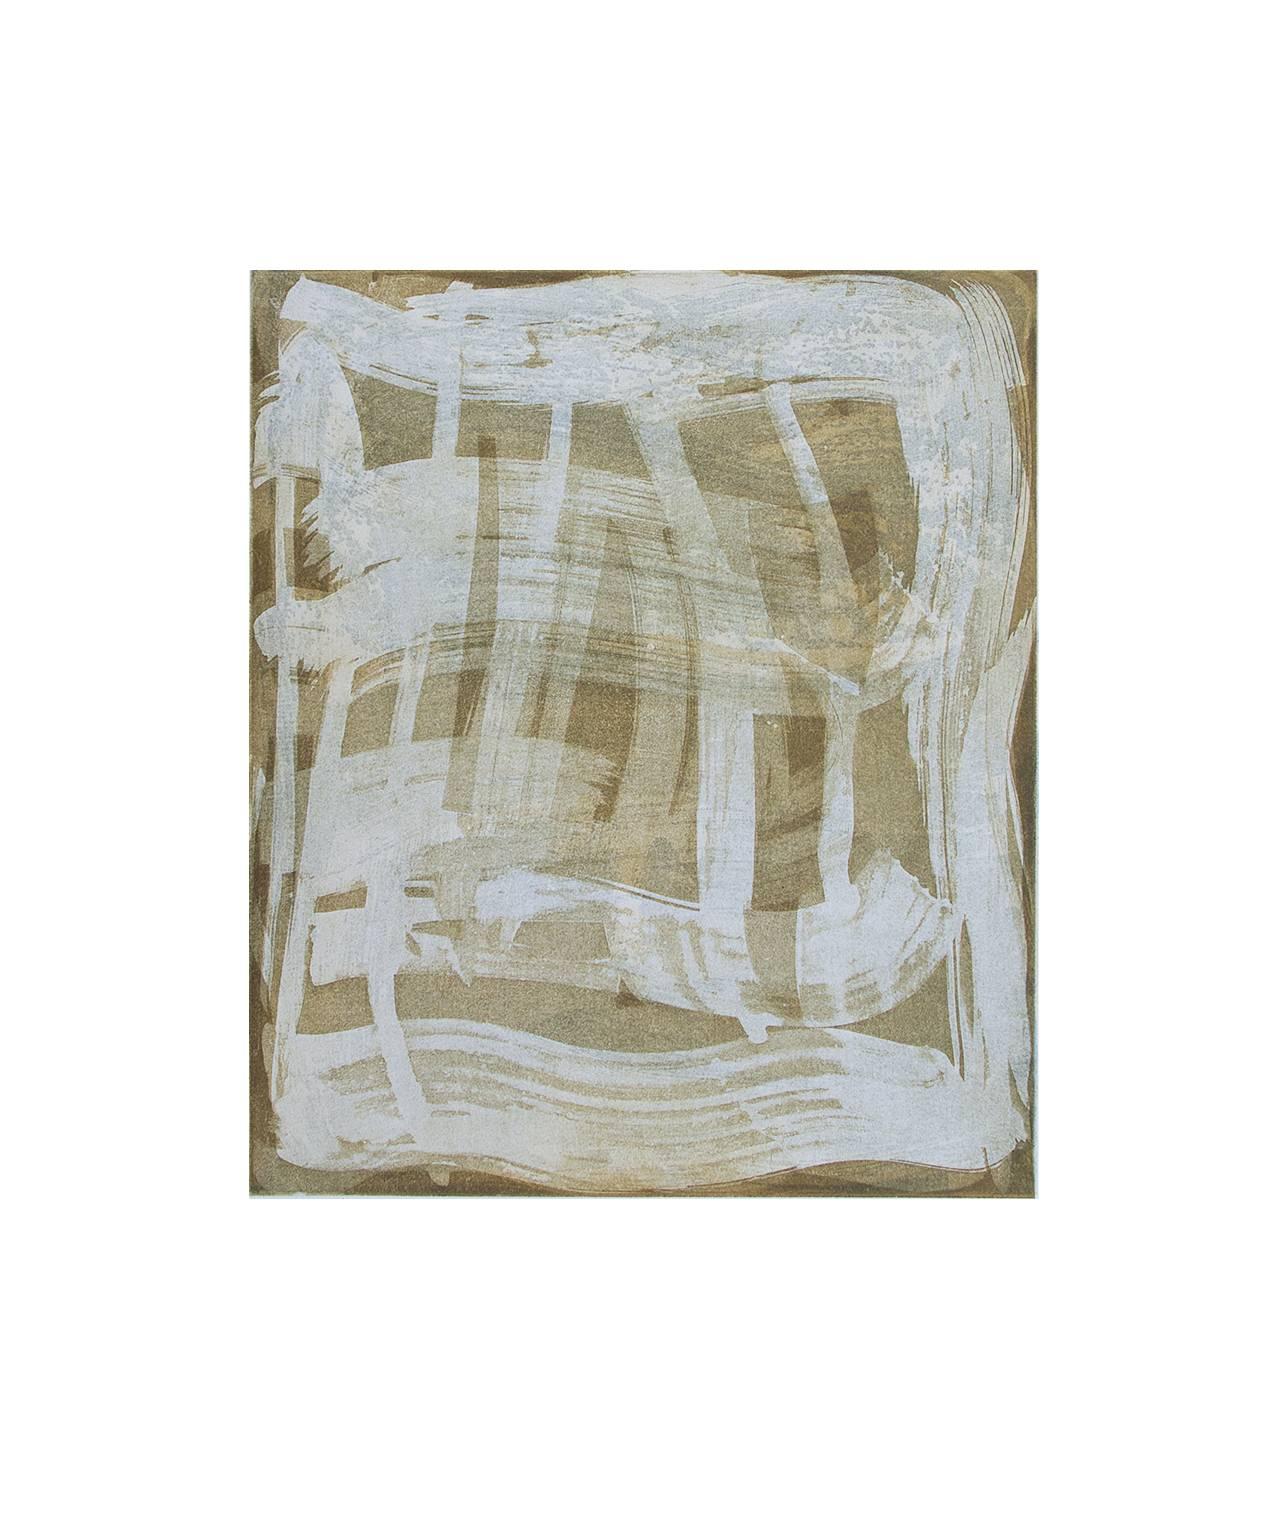 Anne Russinof Abstract Print - "Serpentine Nine", gestural abstract aquatint print, raw umber, pale turquoise.